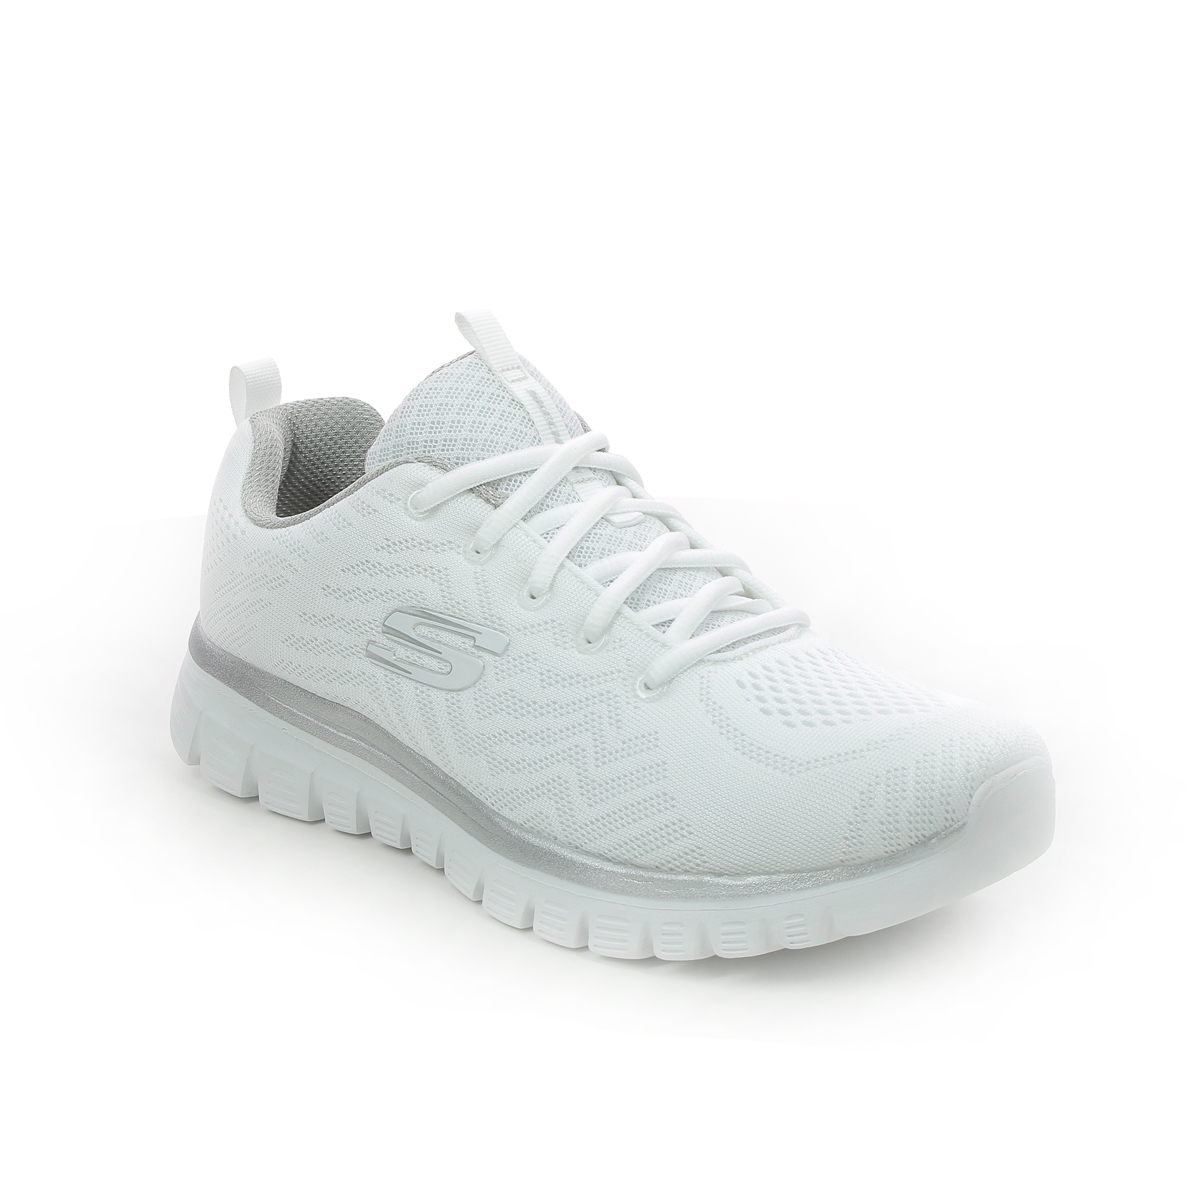 Skechers Get Connected White-Silver Womens Trainers 12615 In Size 6 In Plain White-Silver